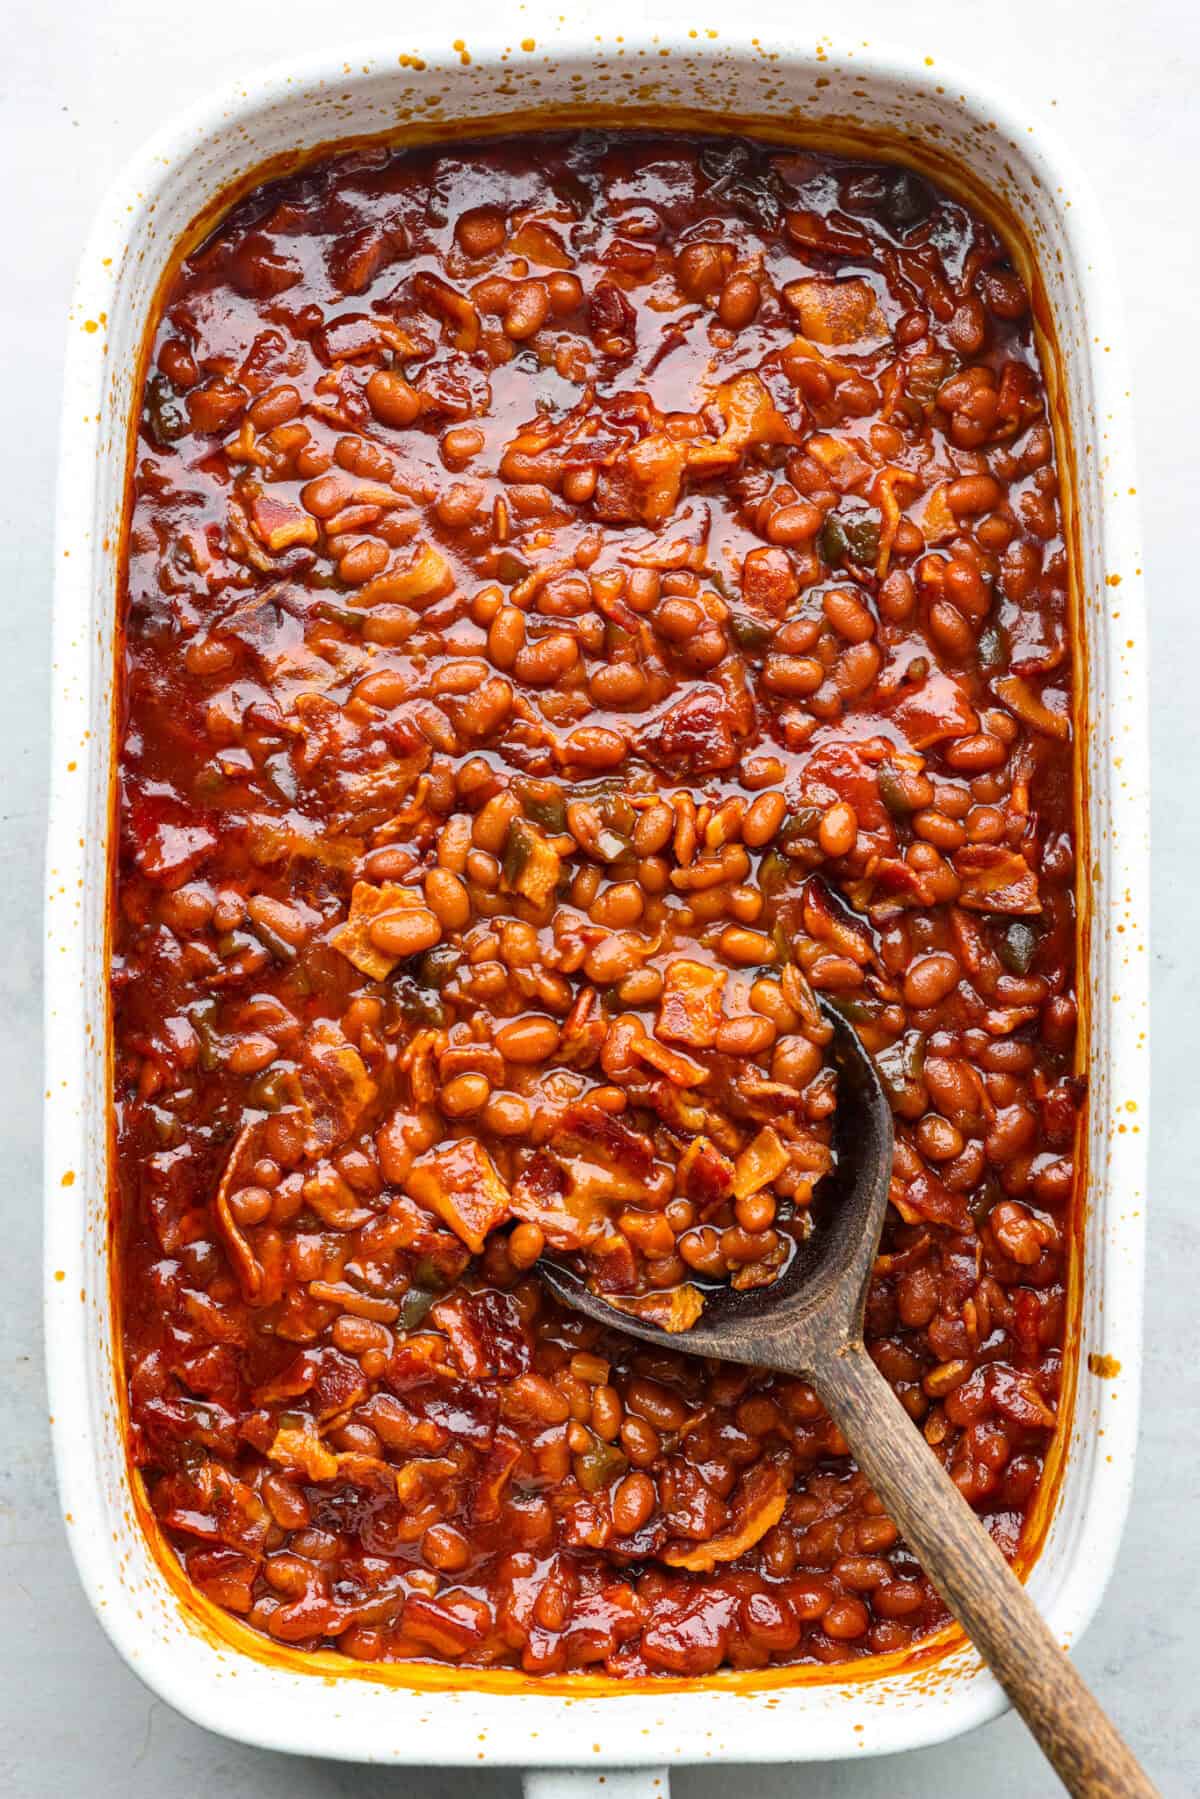 Top view of the world's best baked beans in a baking dish with a wood spoon.